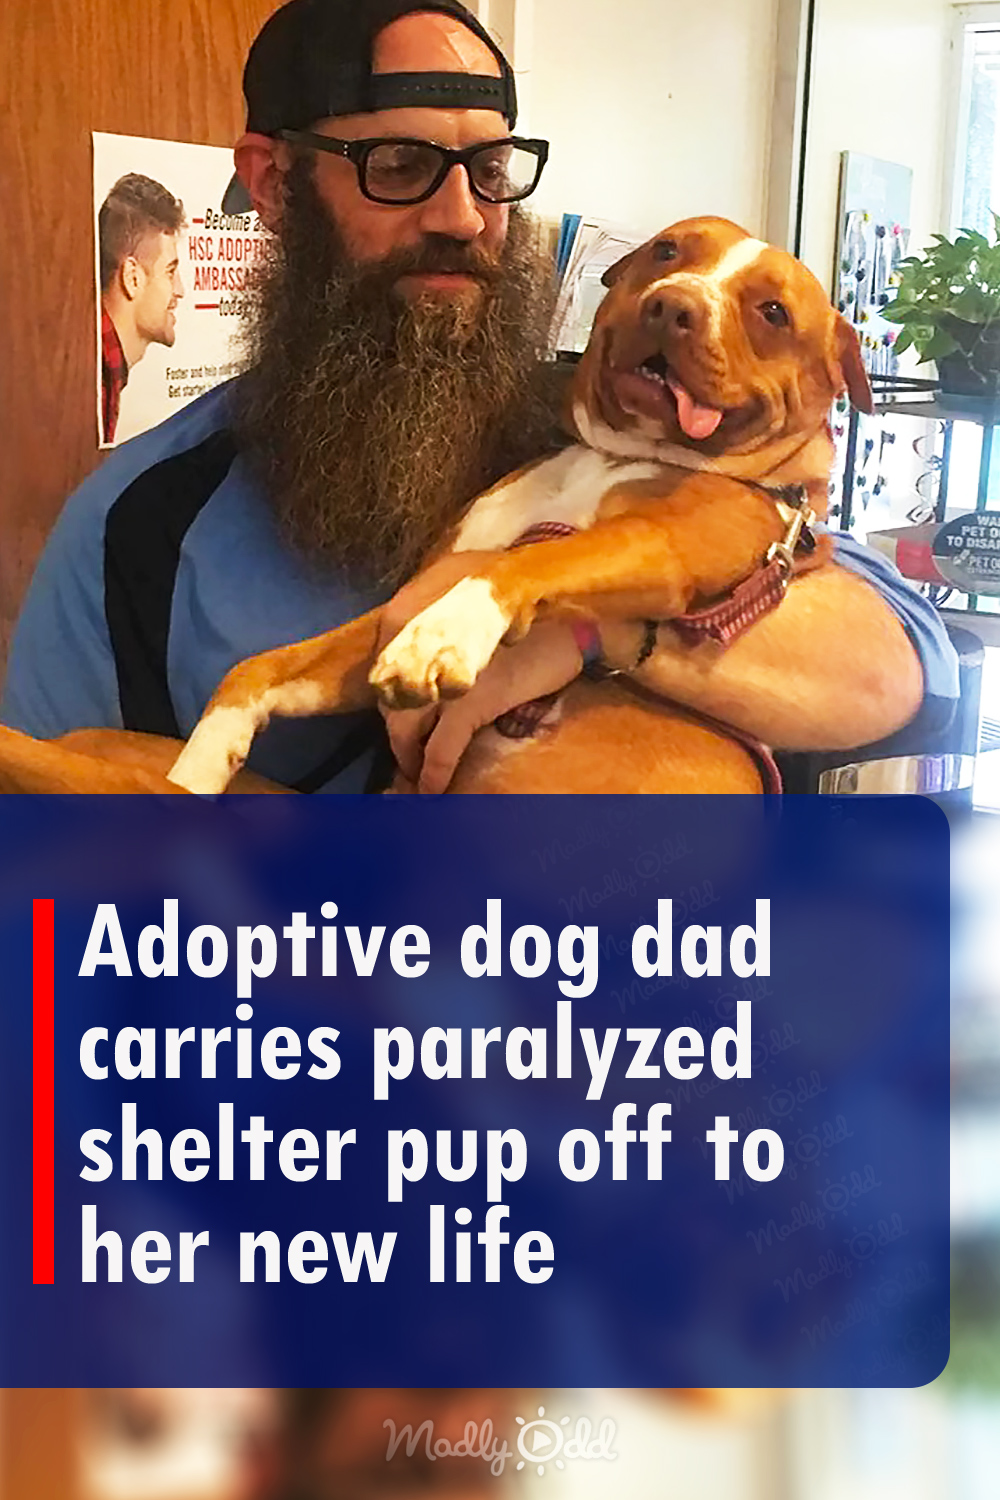 Adoptive dog dad carries paralyzed shelter pup off to her new life